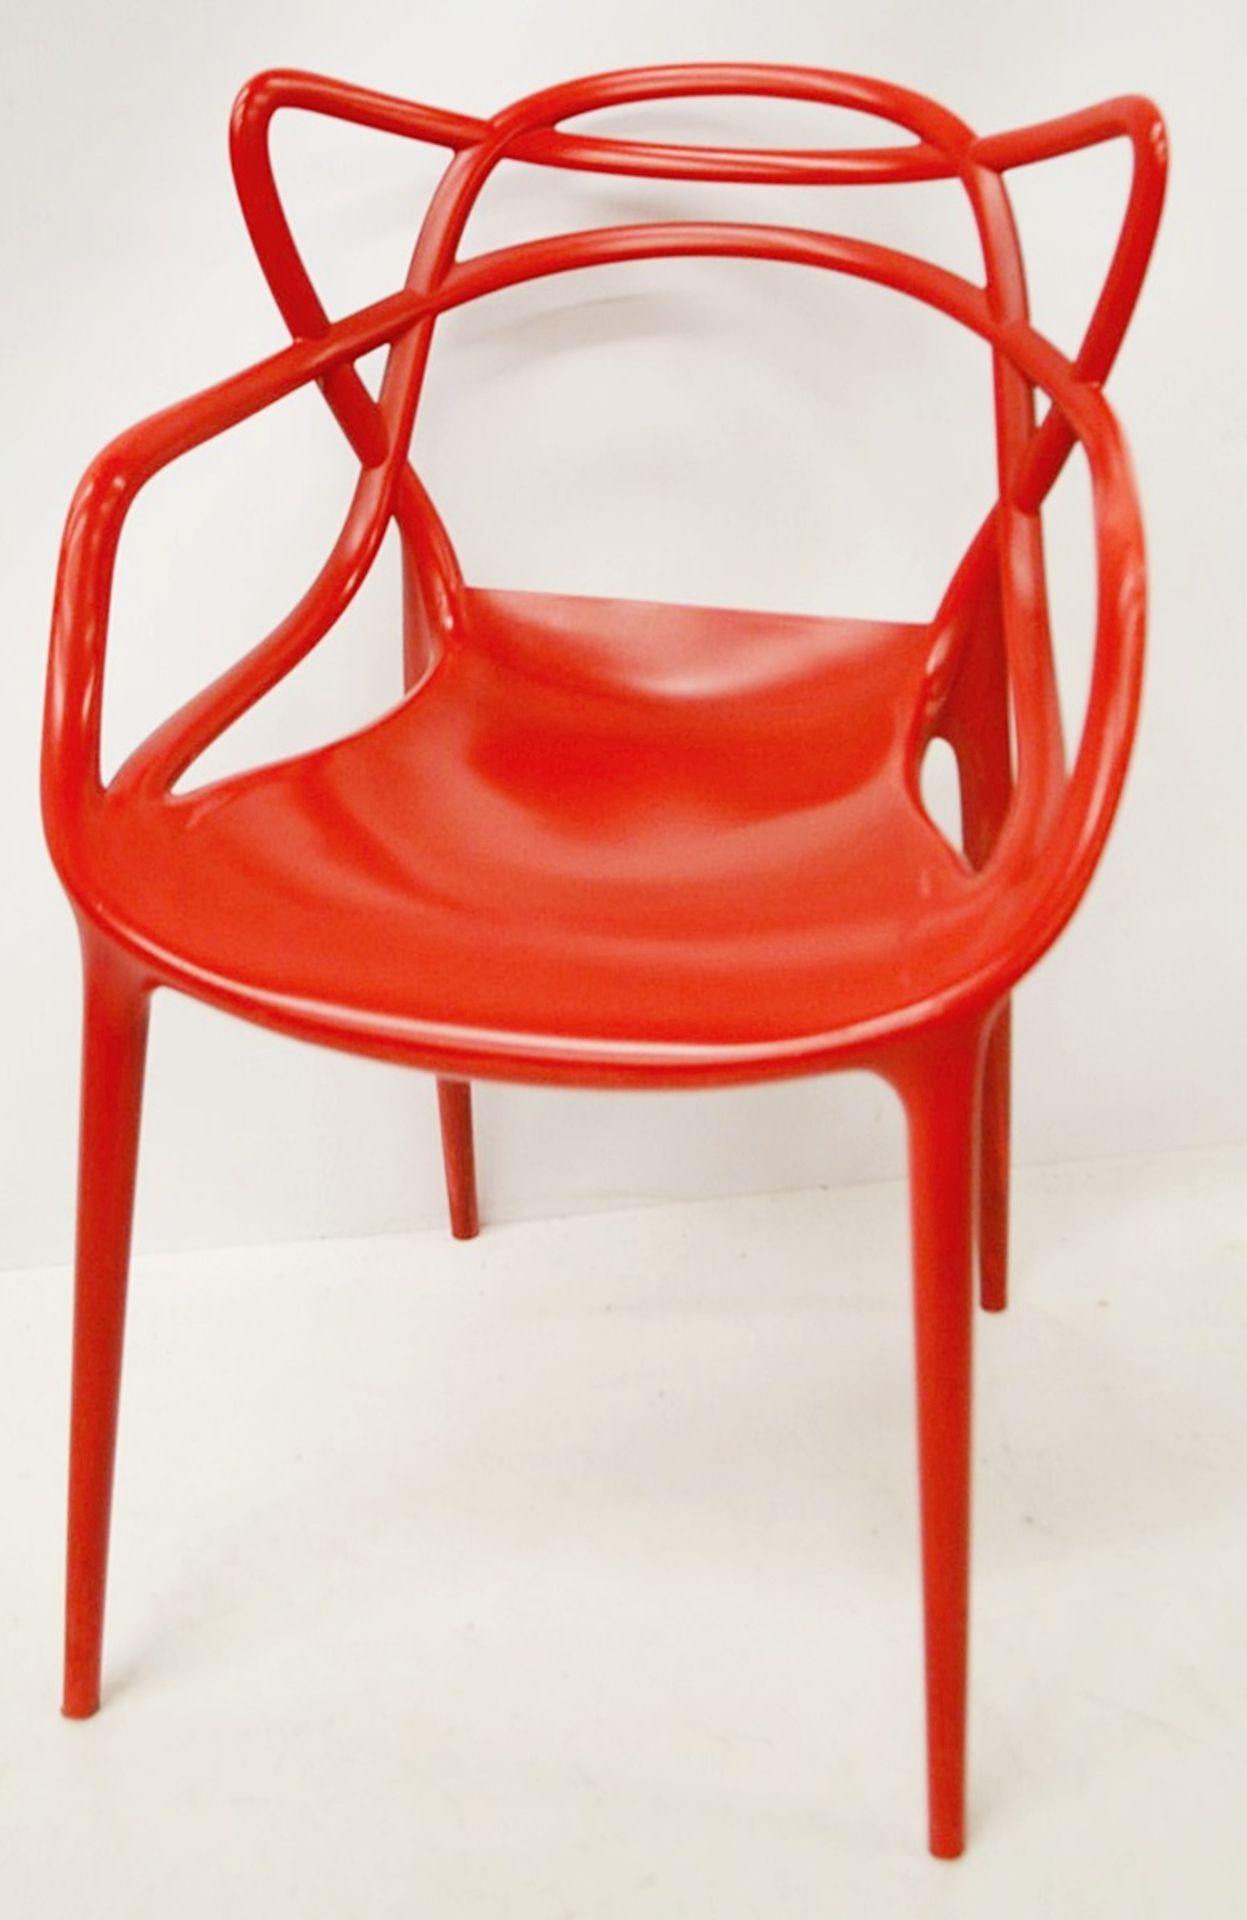 10 x Philippe Starck For Kartell 'Masters' Designer Red Gloss Bistro Chairs - Made In Italy - Used